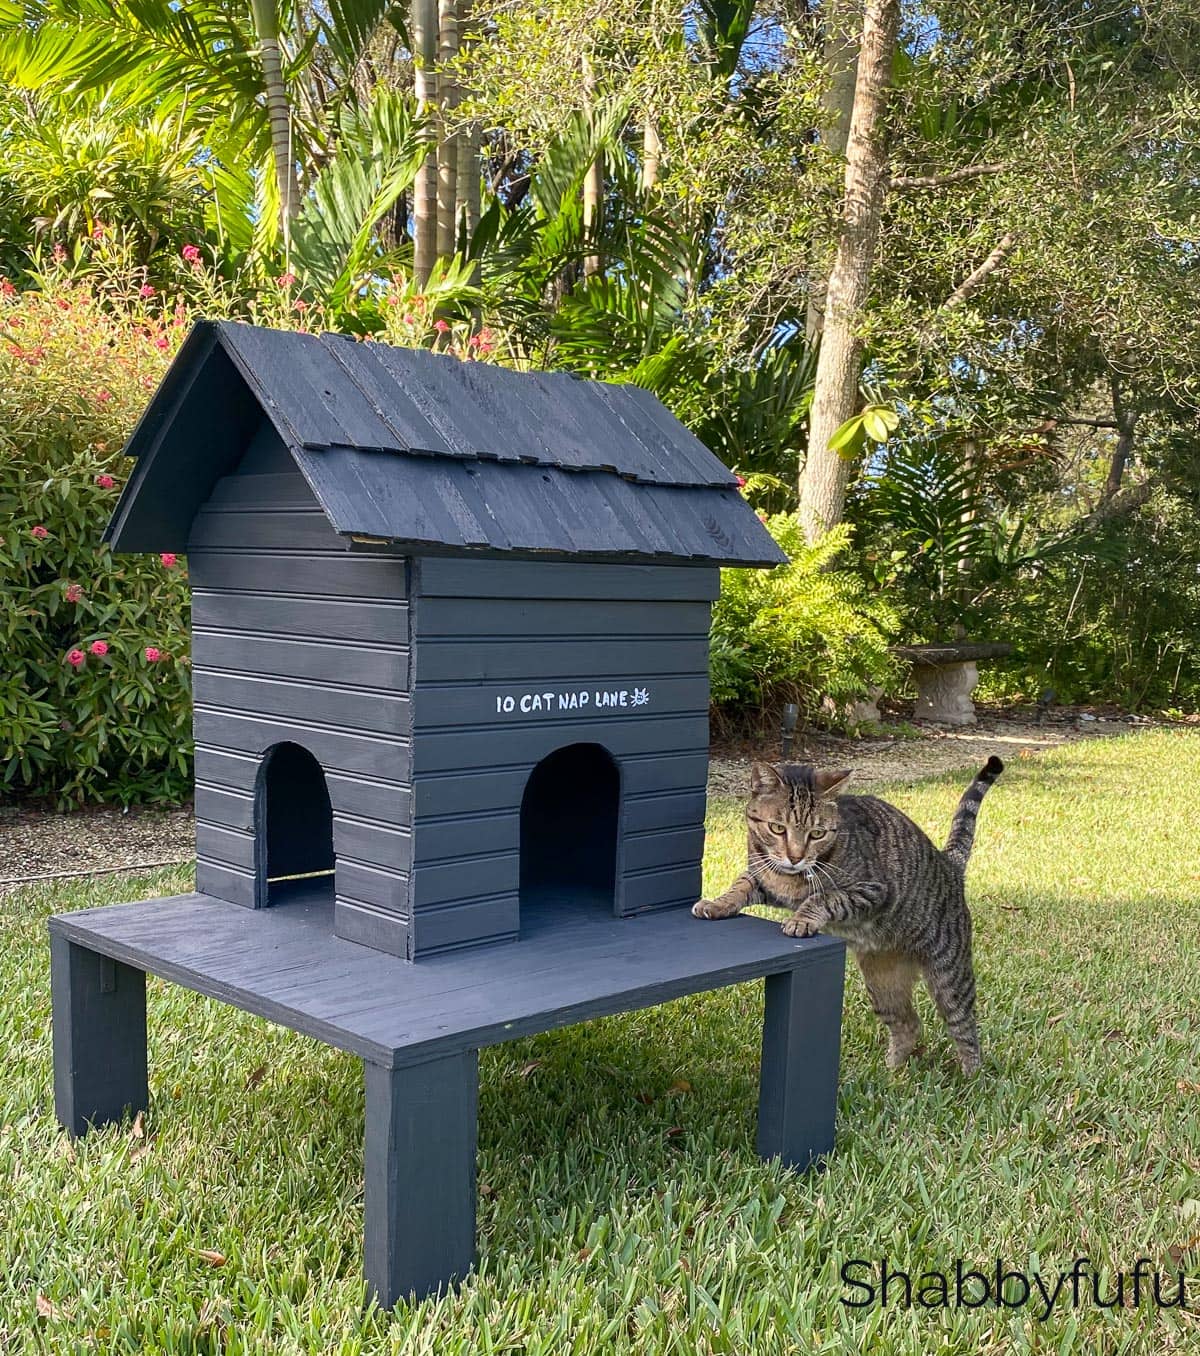 How To Build An Outdoor Cat House Shelter - DIY - shabbyfufu.com